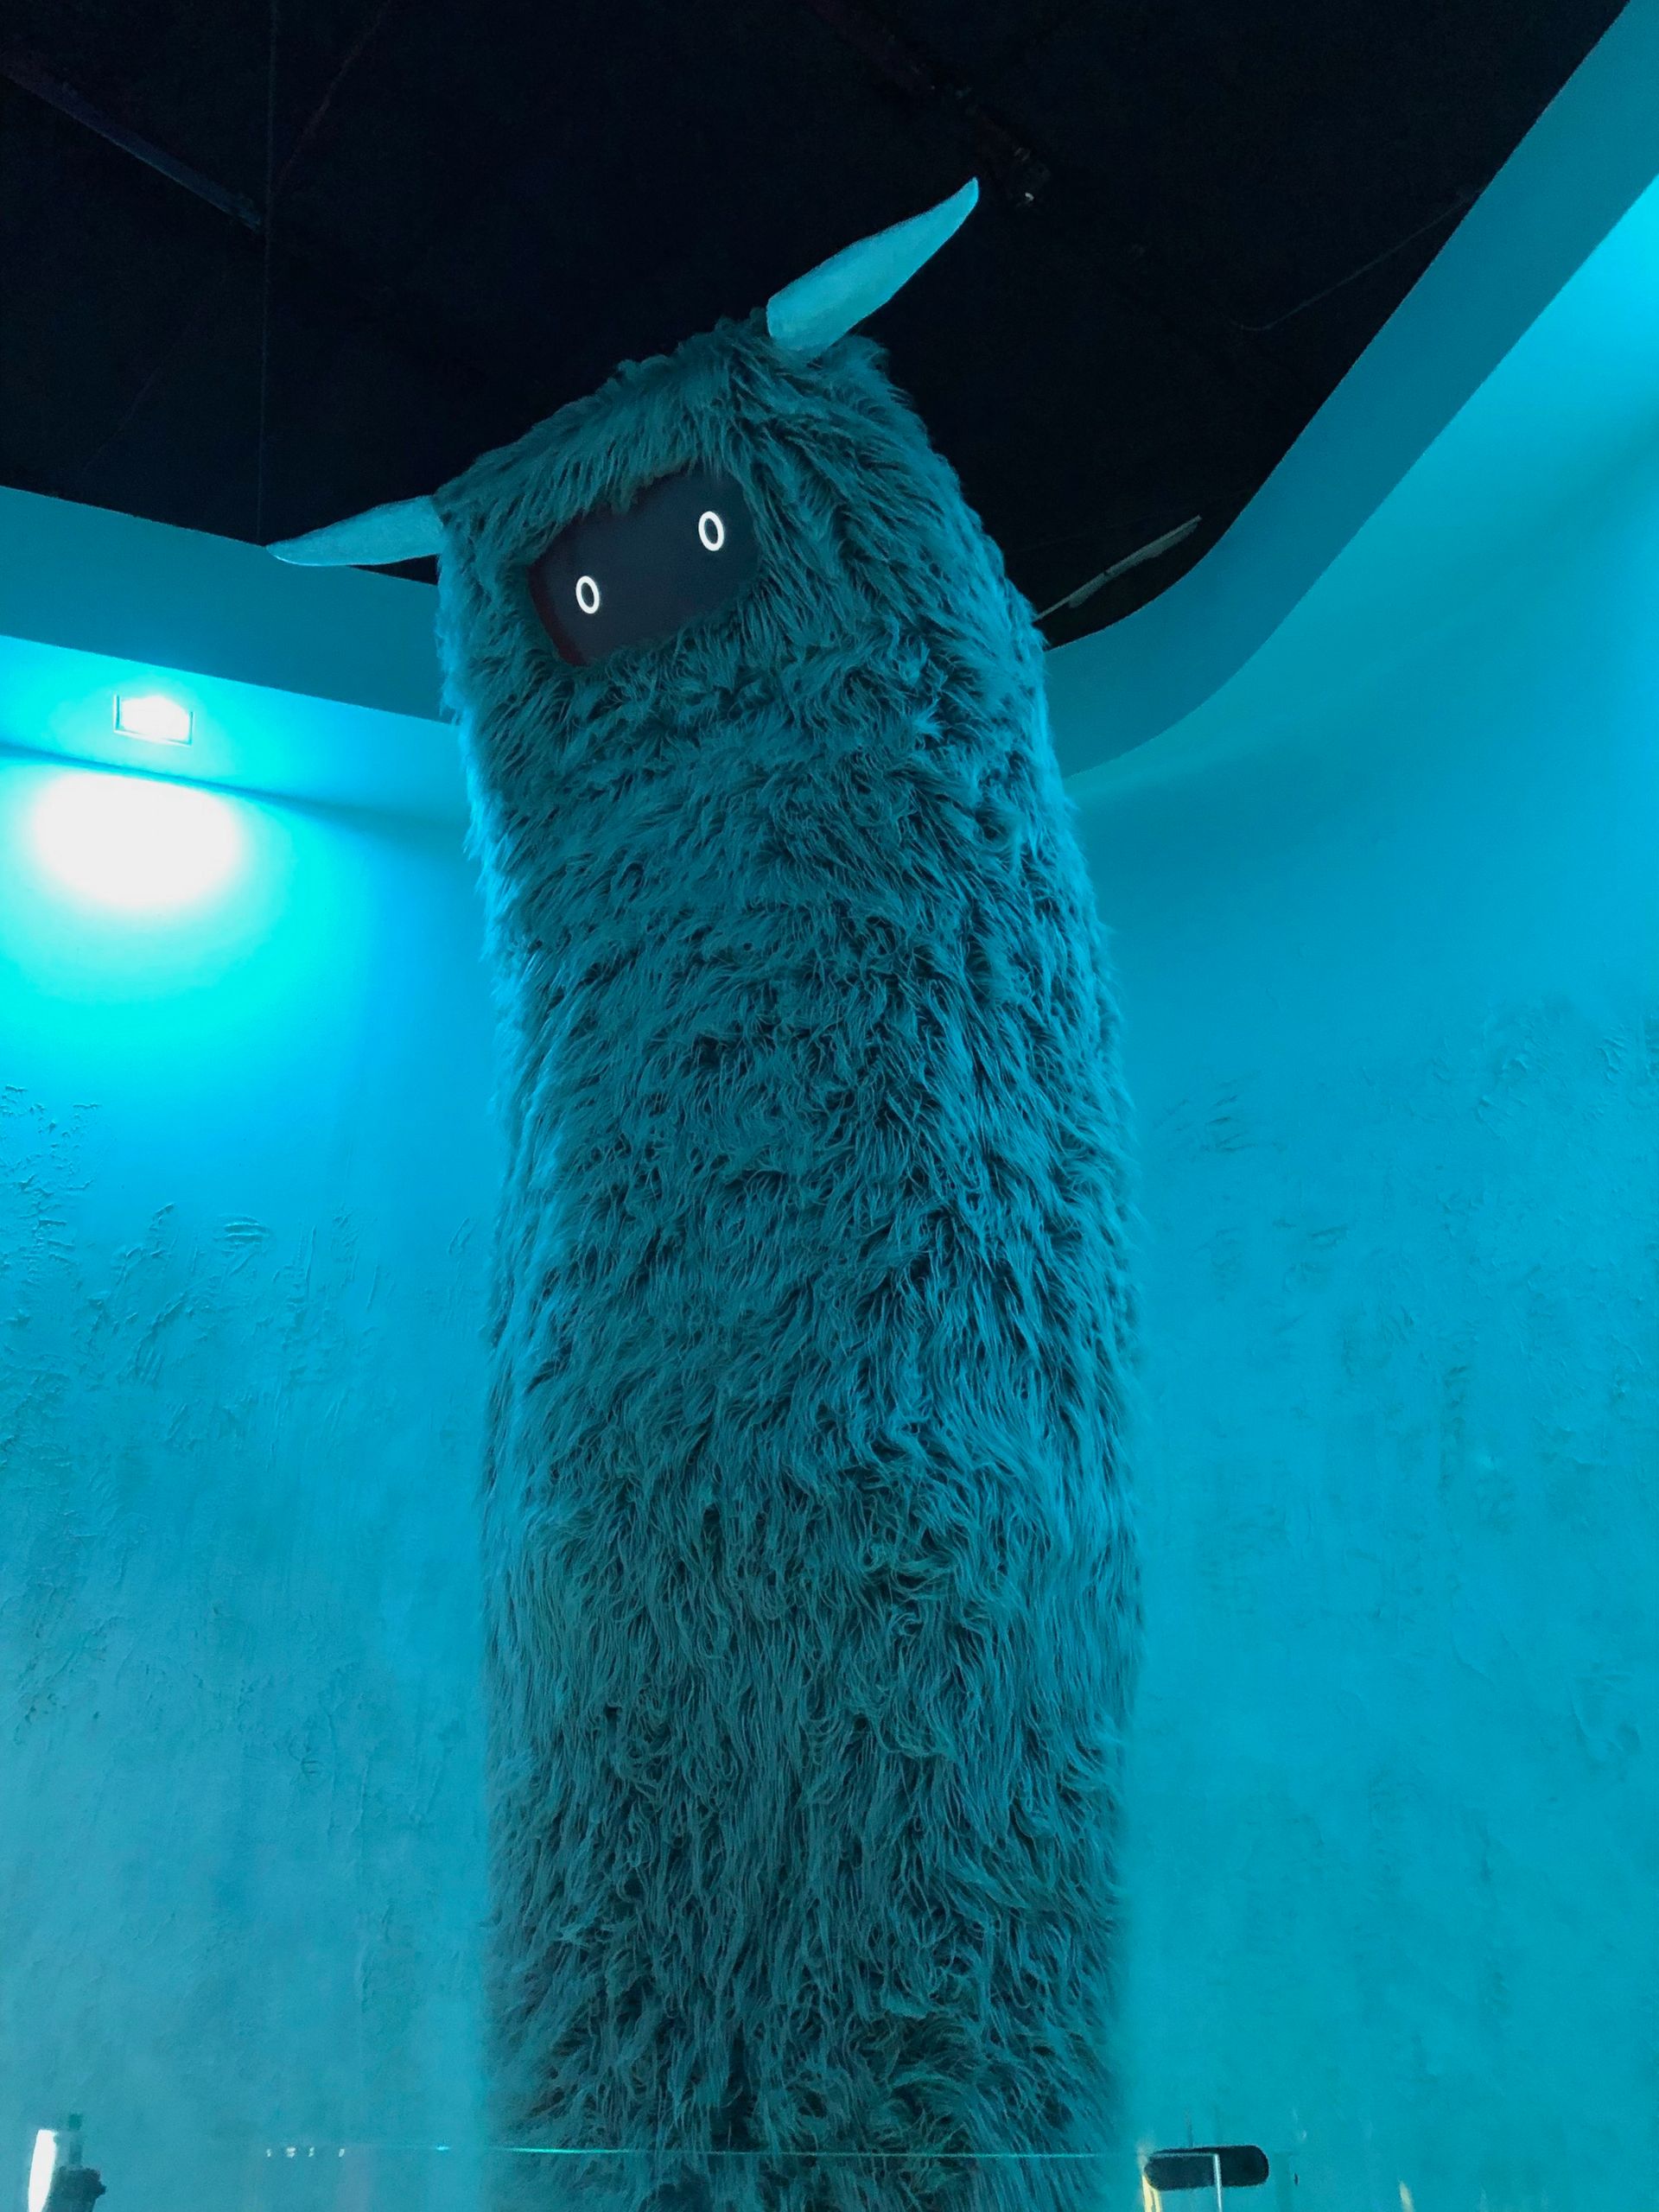 Lauren Oliver's Space Owl sculpture at the House of Eternal Return, Meow Wolf's attraction in Santa Fe, New Mexico Photo by Sarah Nichols, via Flickr